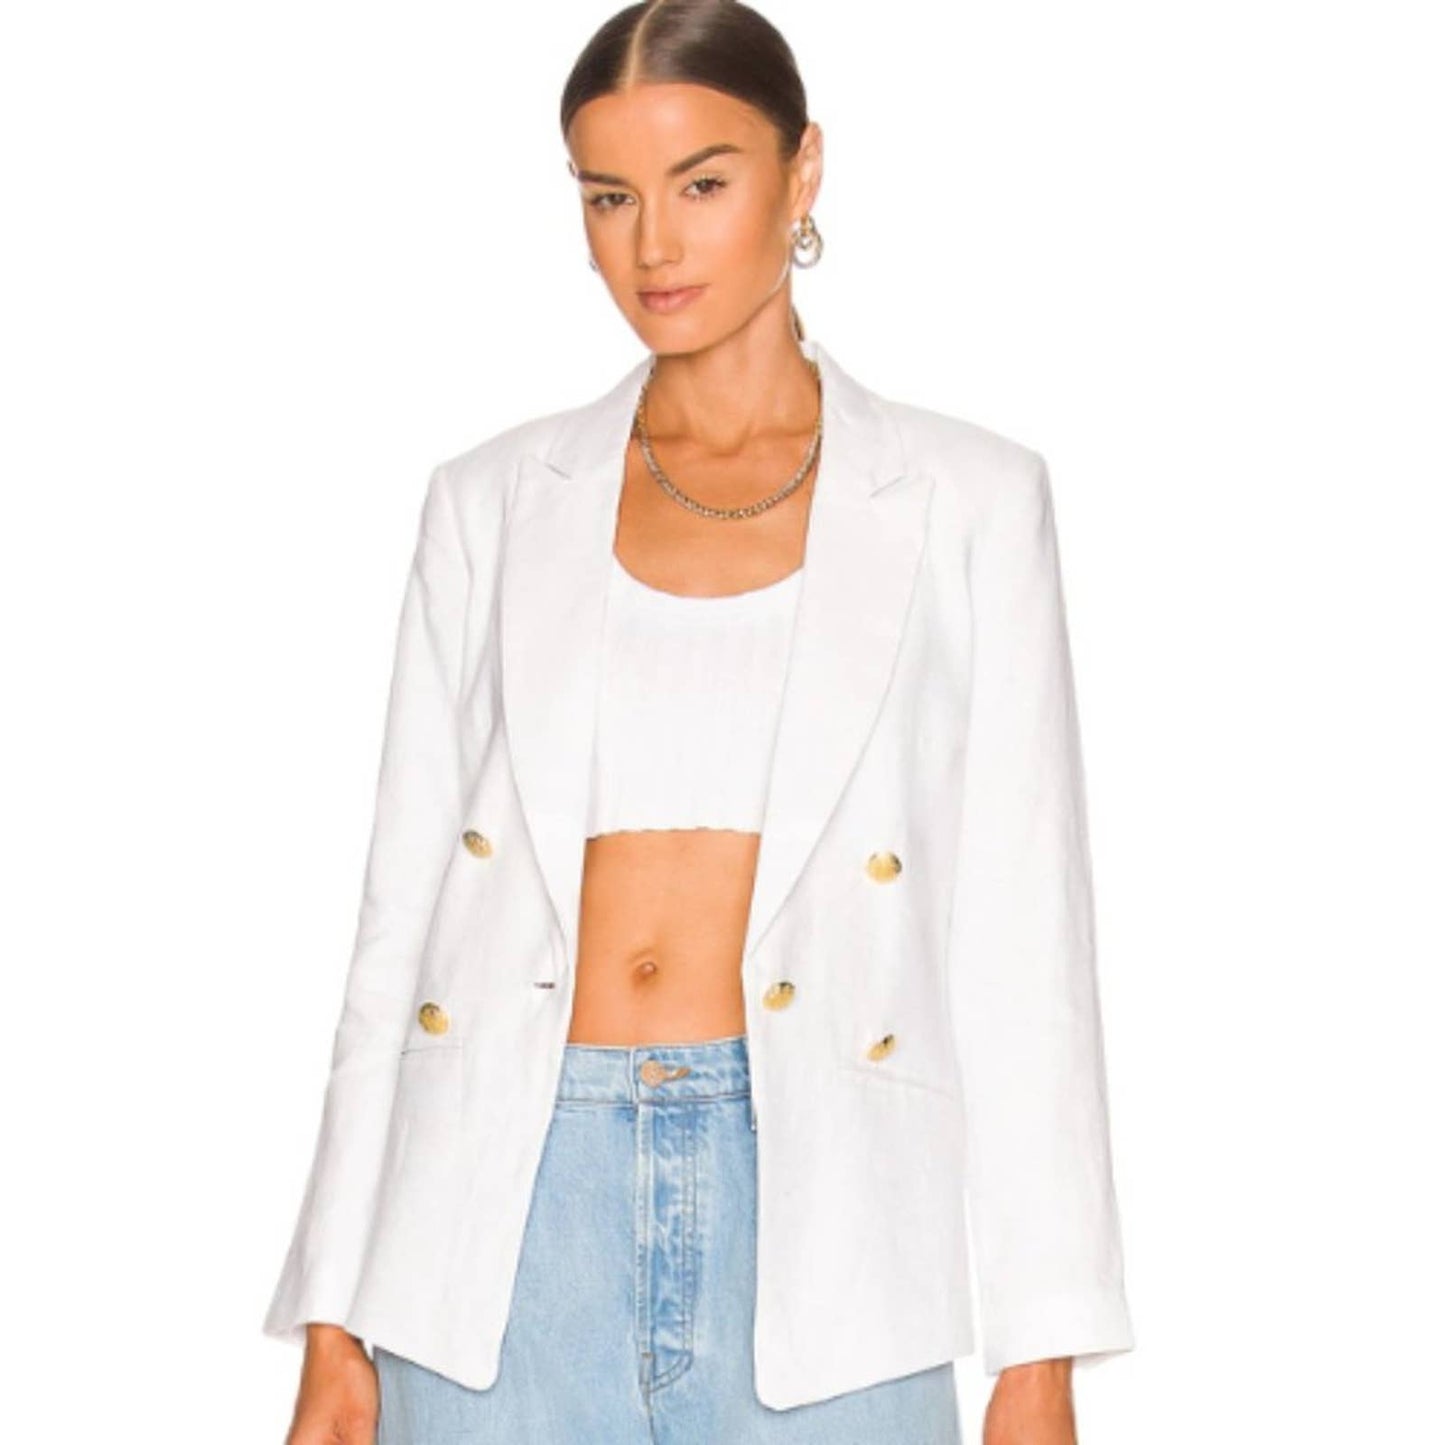 Central Park West Frankie Double Breasted Blazer in White NWT Size Medium